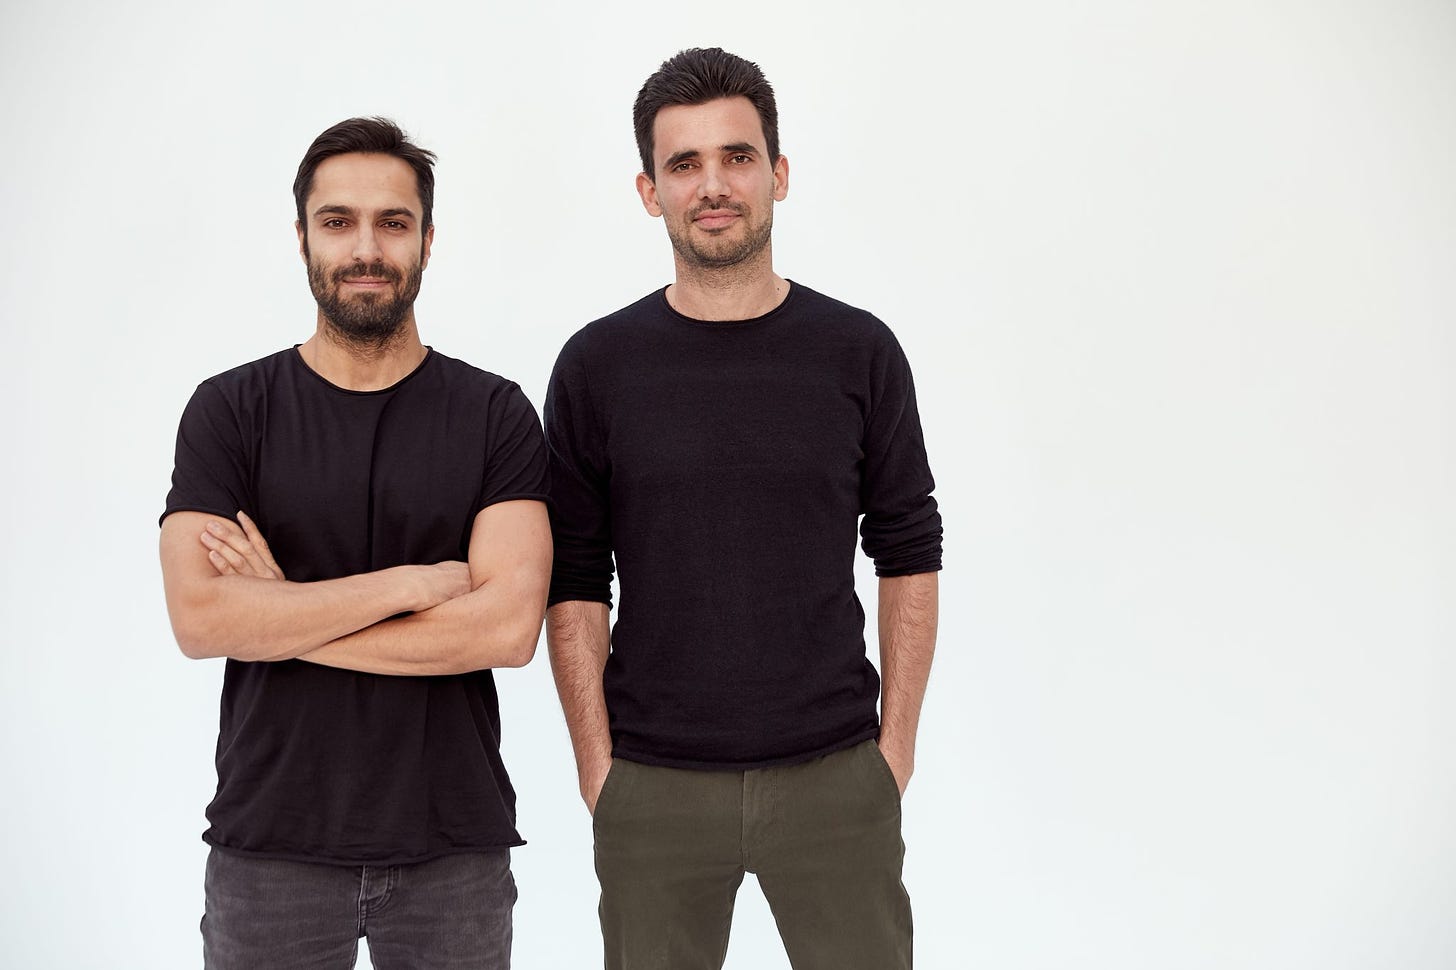 https://content.sifted.eu/wp-content/uploads/2020/08/17170811/Voodoo-founders-Alexandre-Yazdi-and-Laurent-Ritter-scaled.jpg